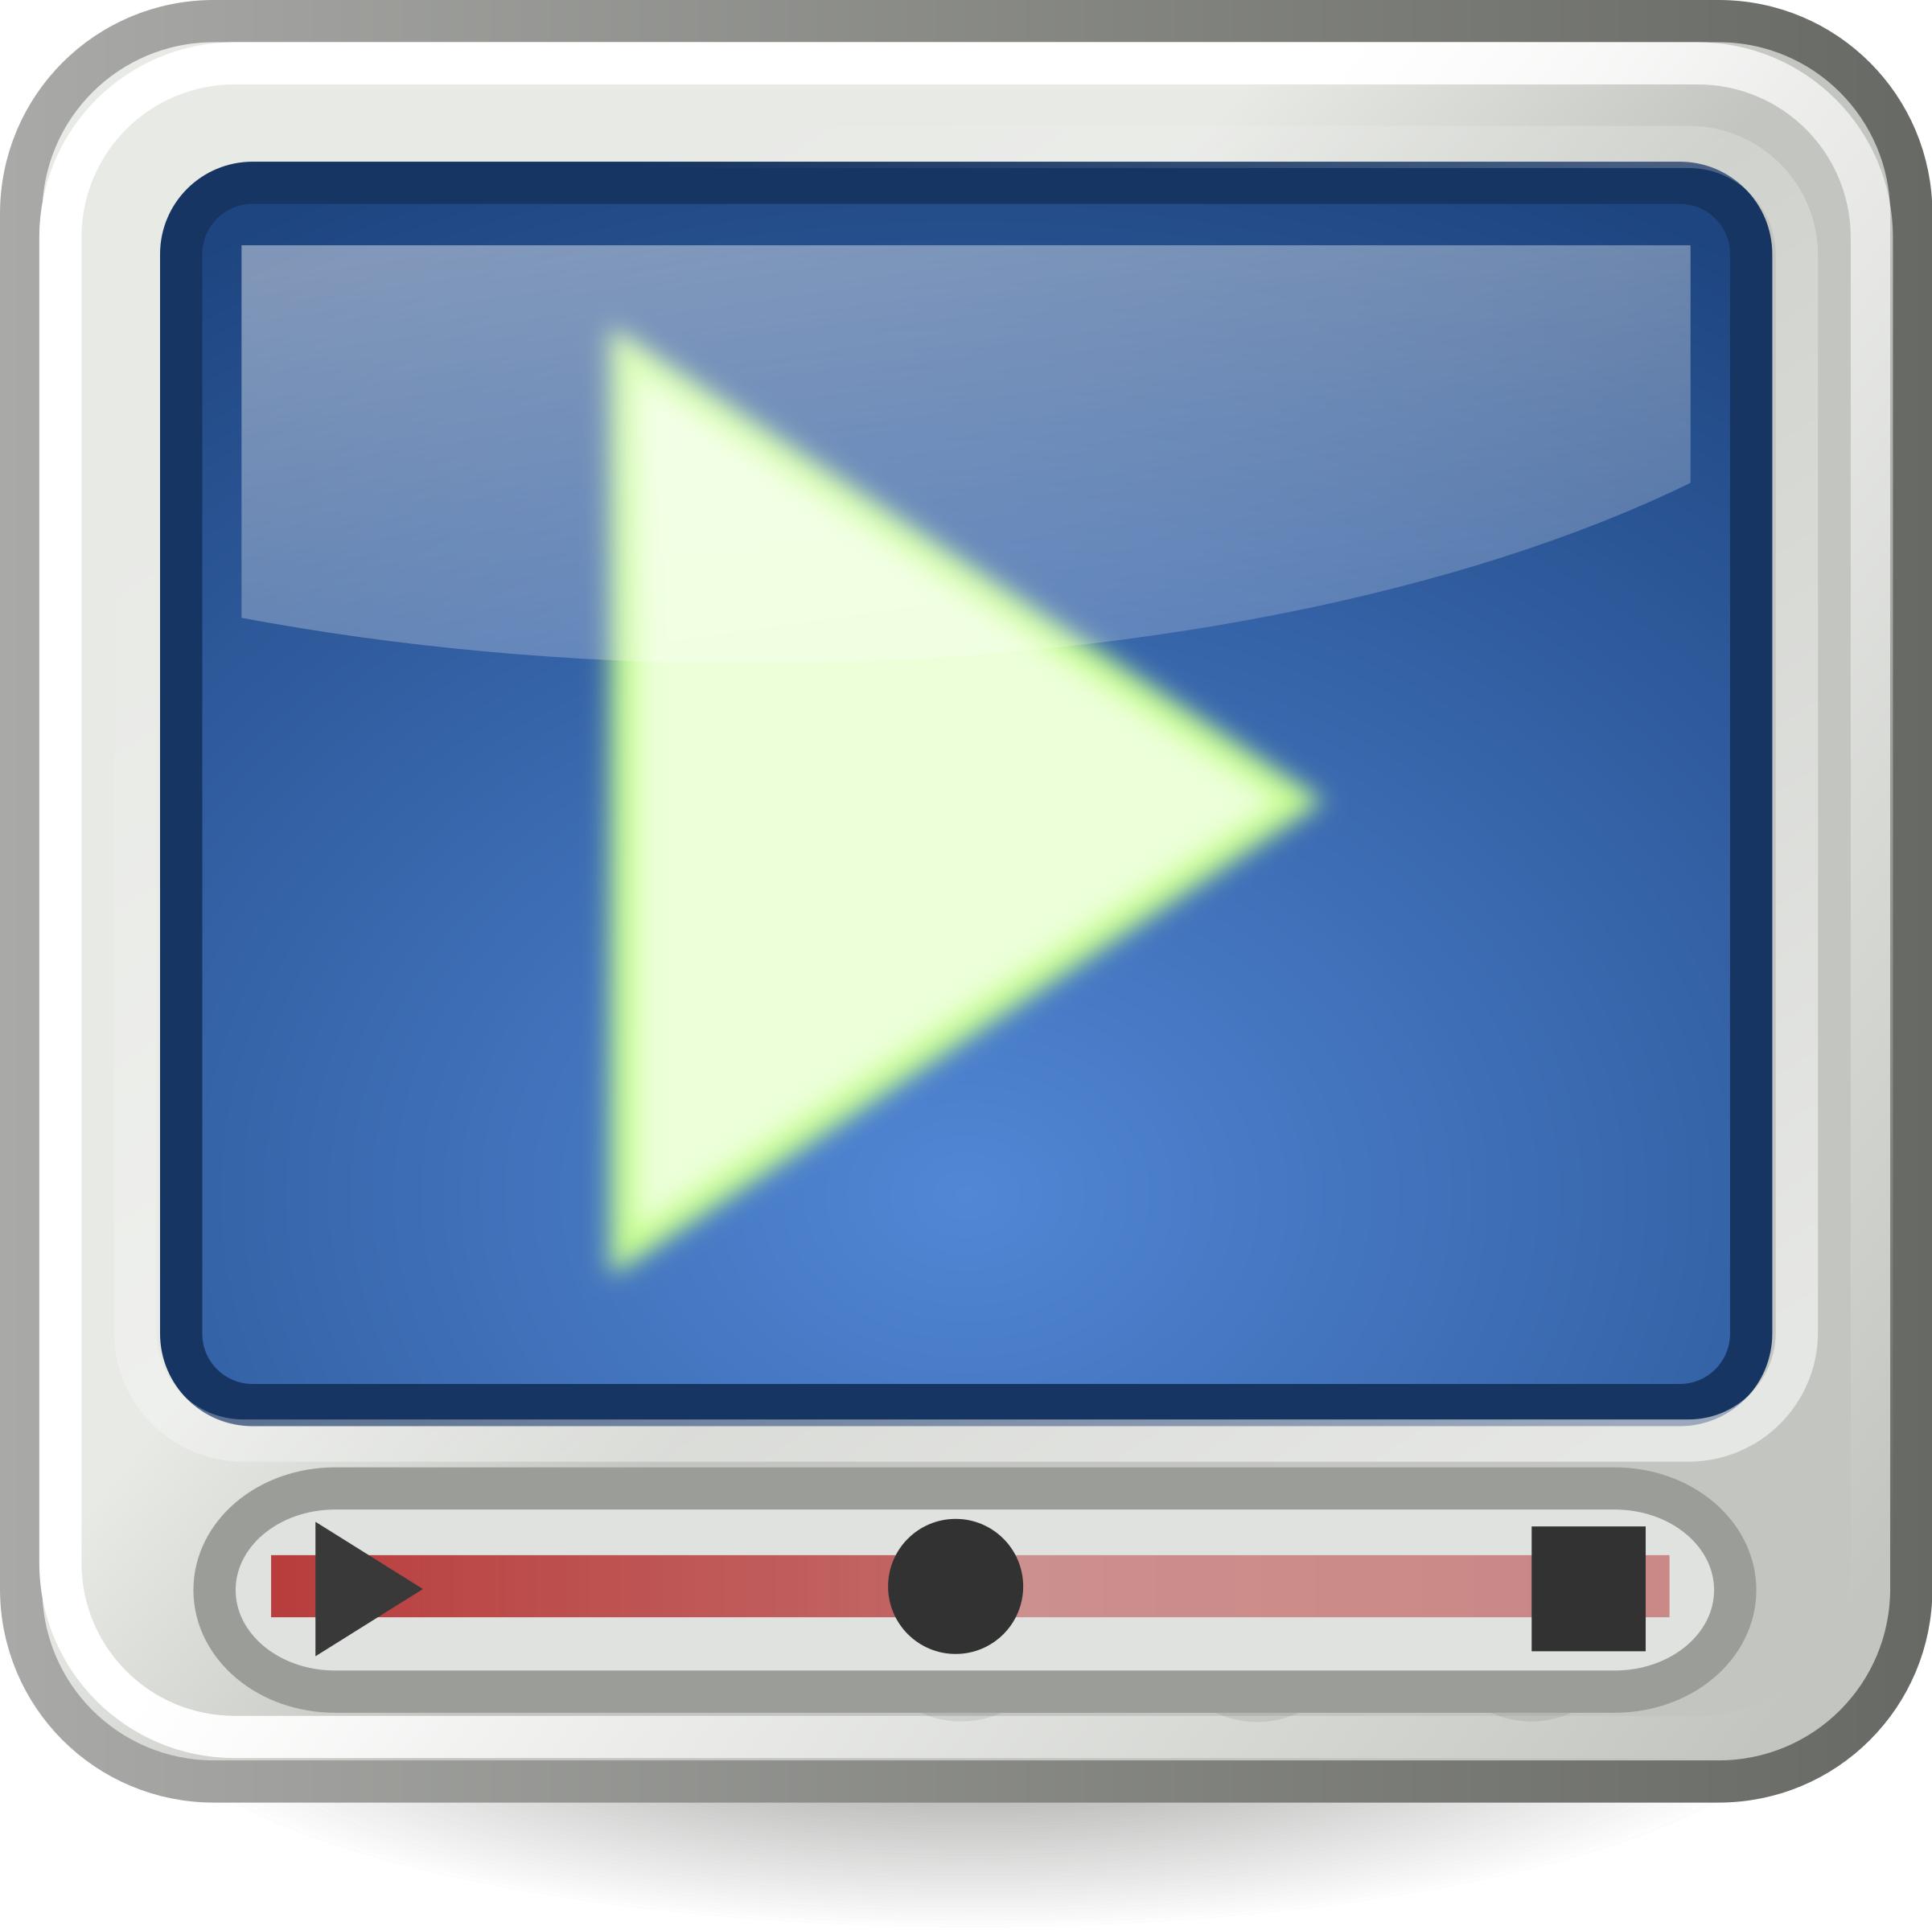 Tango-styled video player icon png